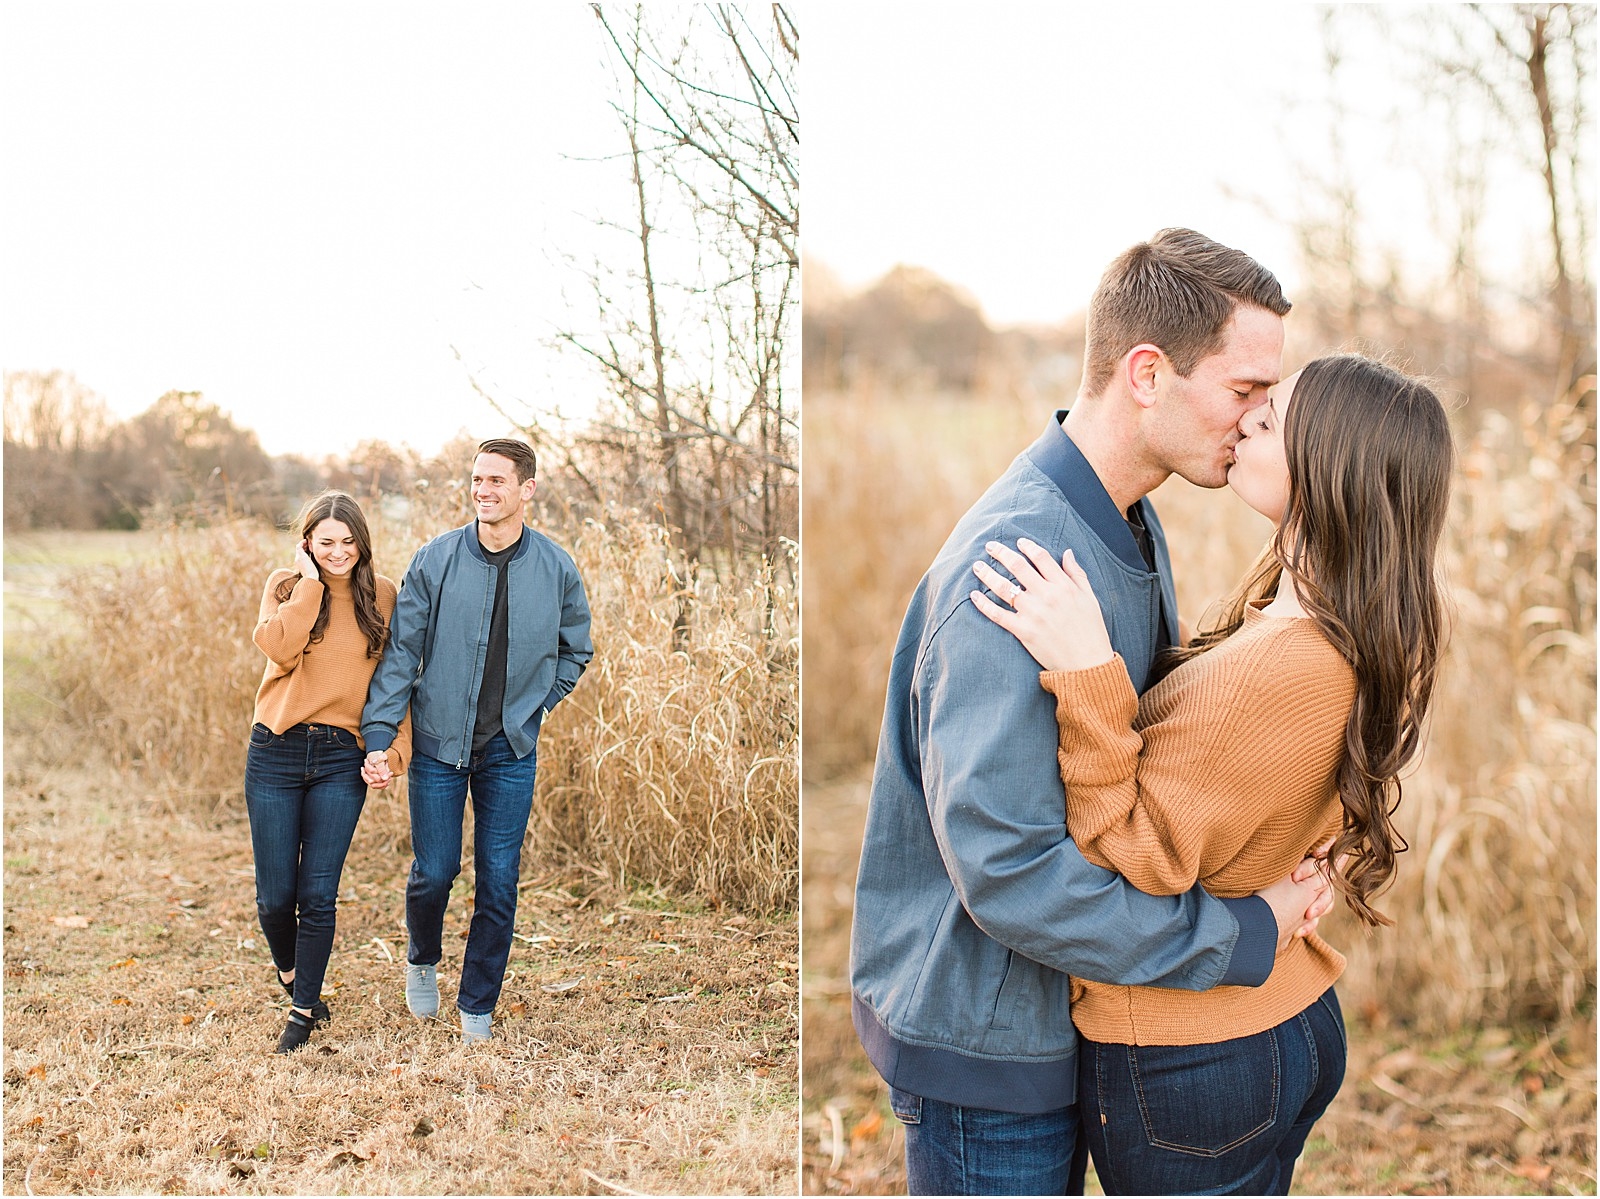 Kaley and Devon's fall Evansville Indiana engagement session. | #fallengagementsession #evansvilleindiana #evansvilleindianawedding | 0044.jpg